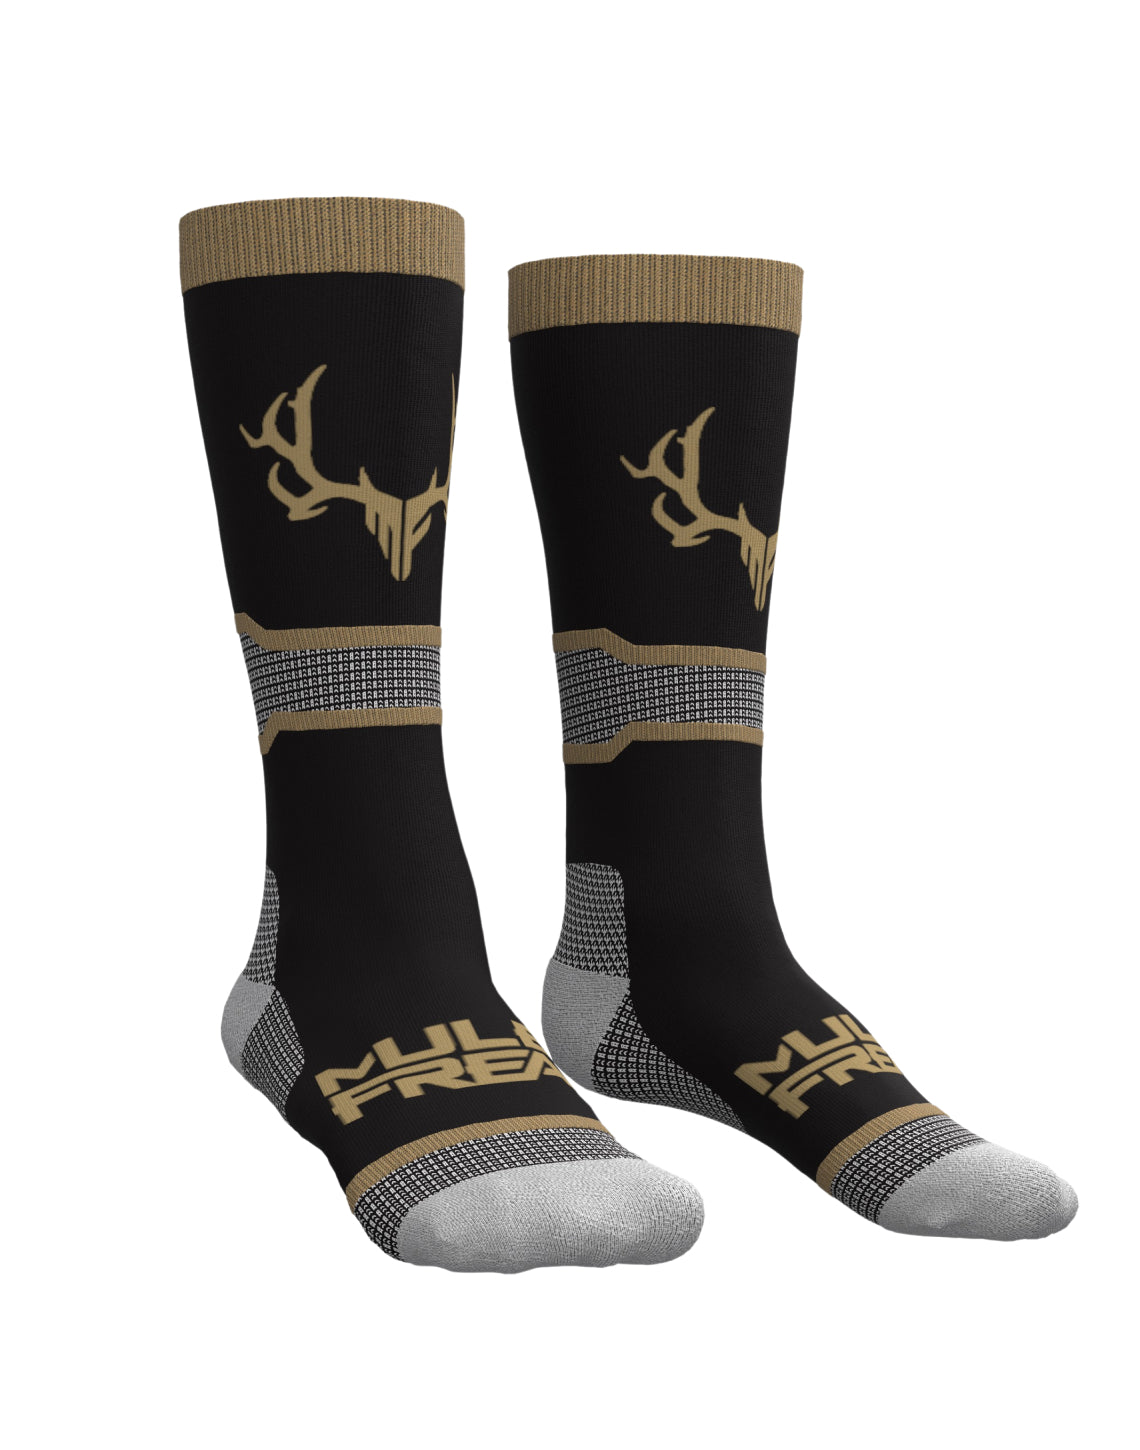 Elite Merino Socks with Muley Freak logo, perfect for enduring outdoor activities.